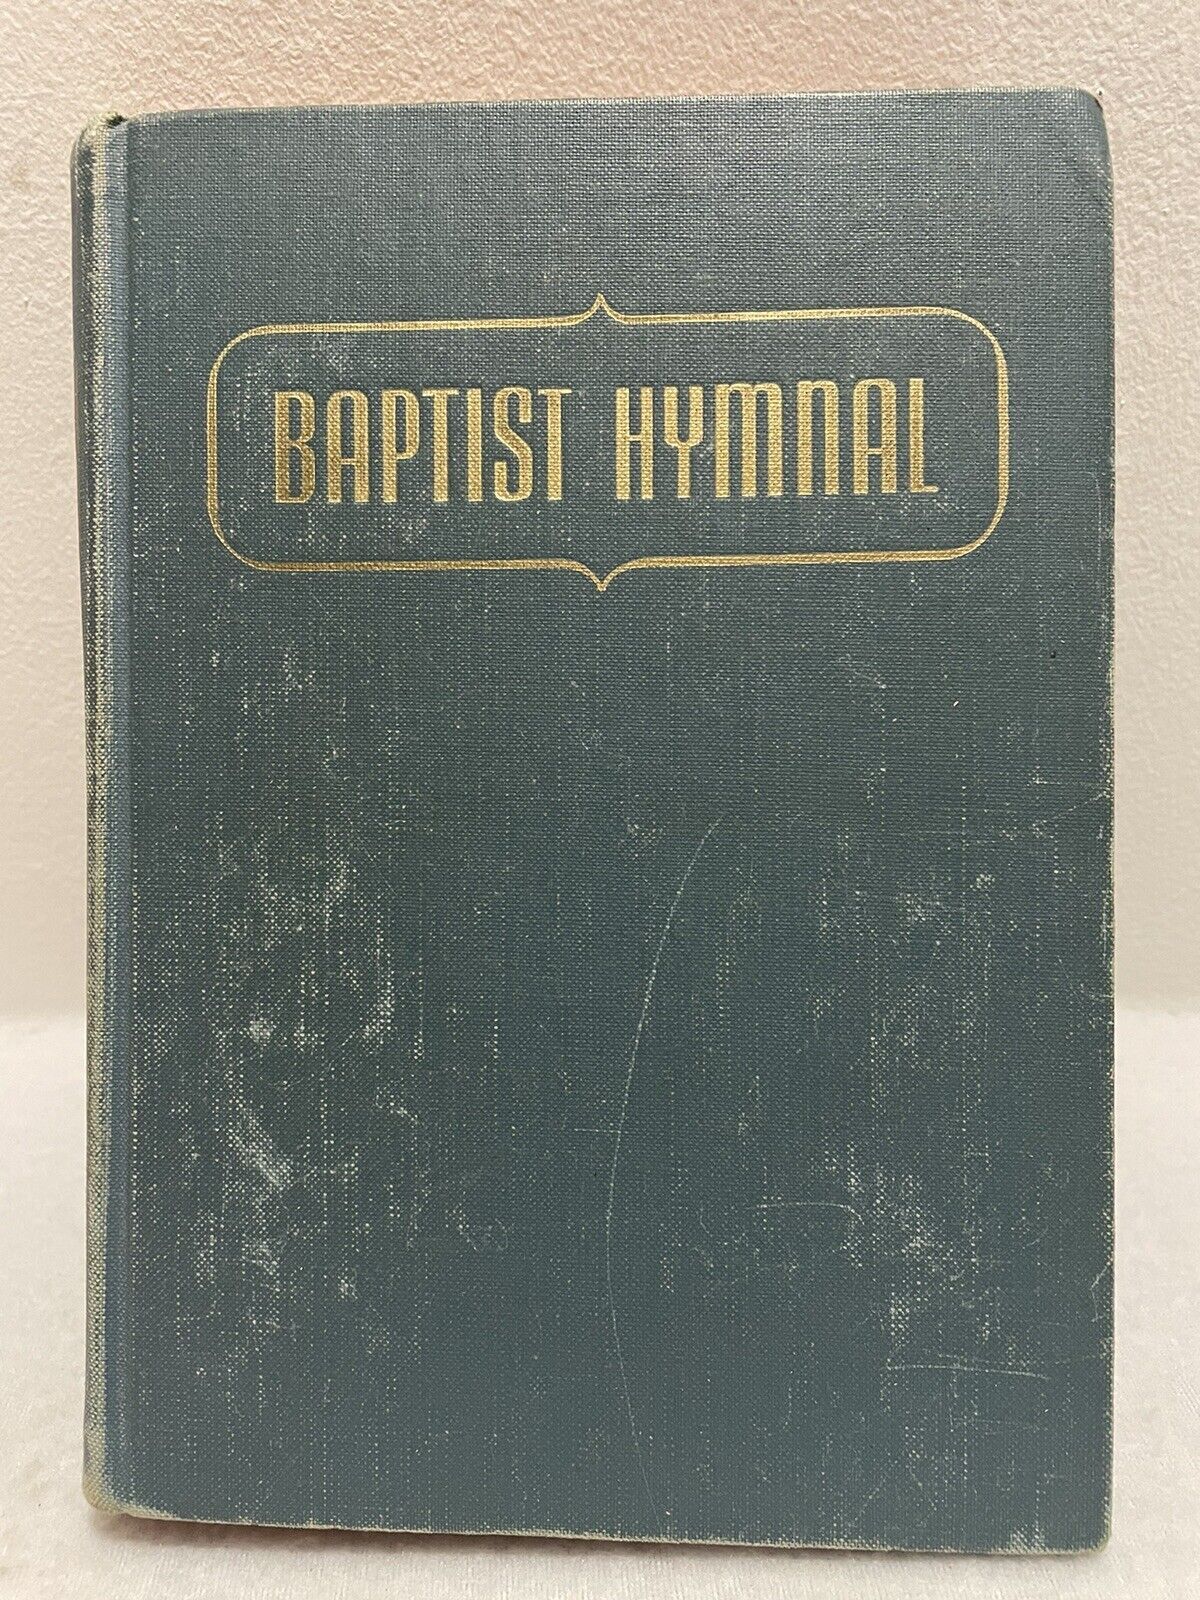 Vintage Baptist Hymnal 1956 Hardcover Convention Press Green Cover Songbook